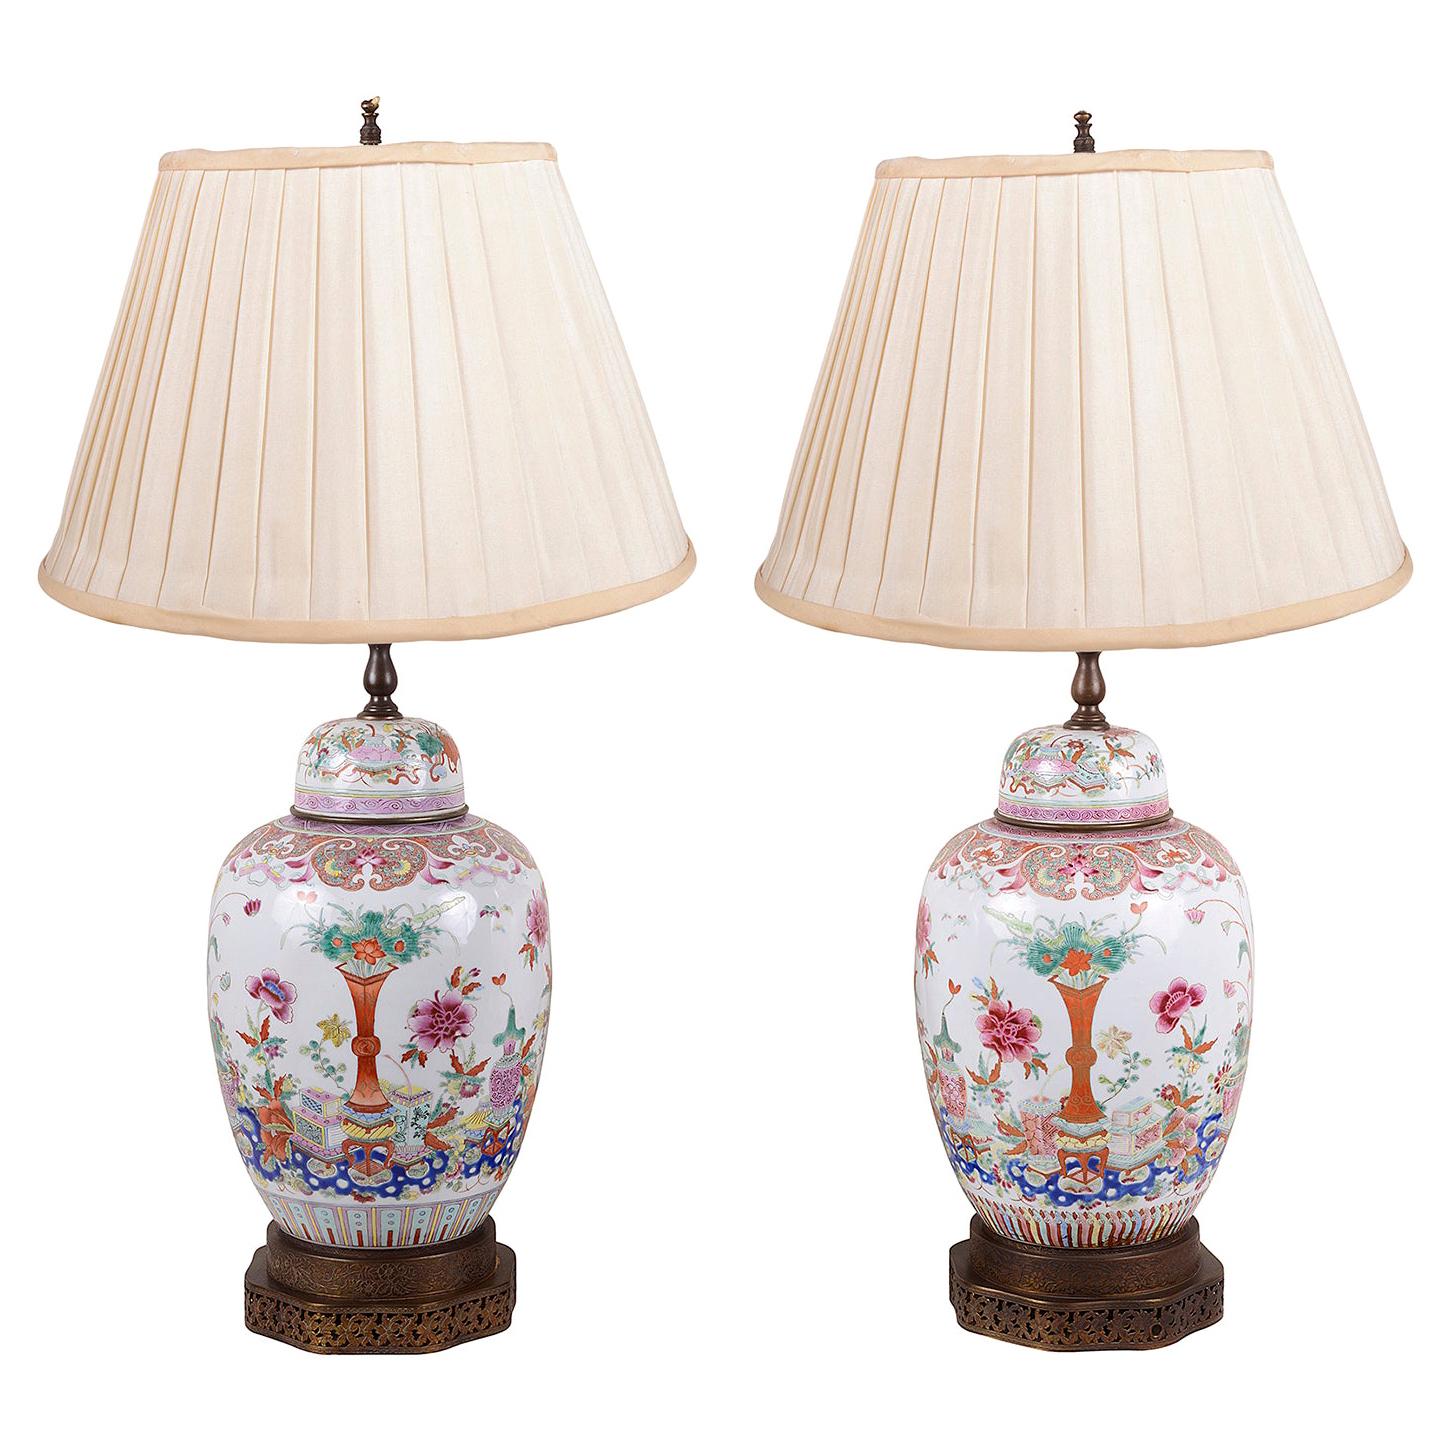 Late 19th Century Chinese Ginger Jar Now Mounted As A Lamp For Sale At 1stdibs 